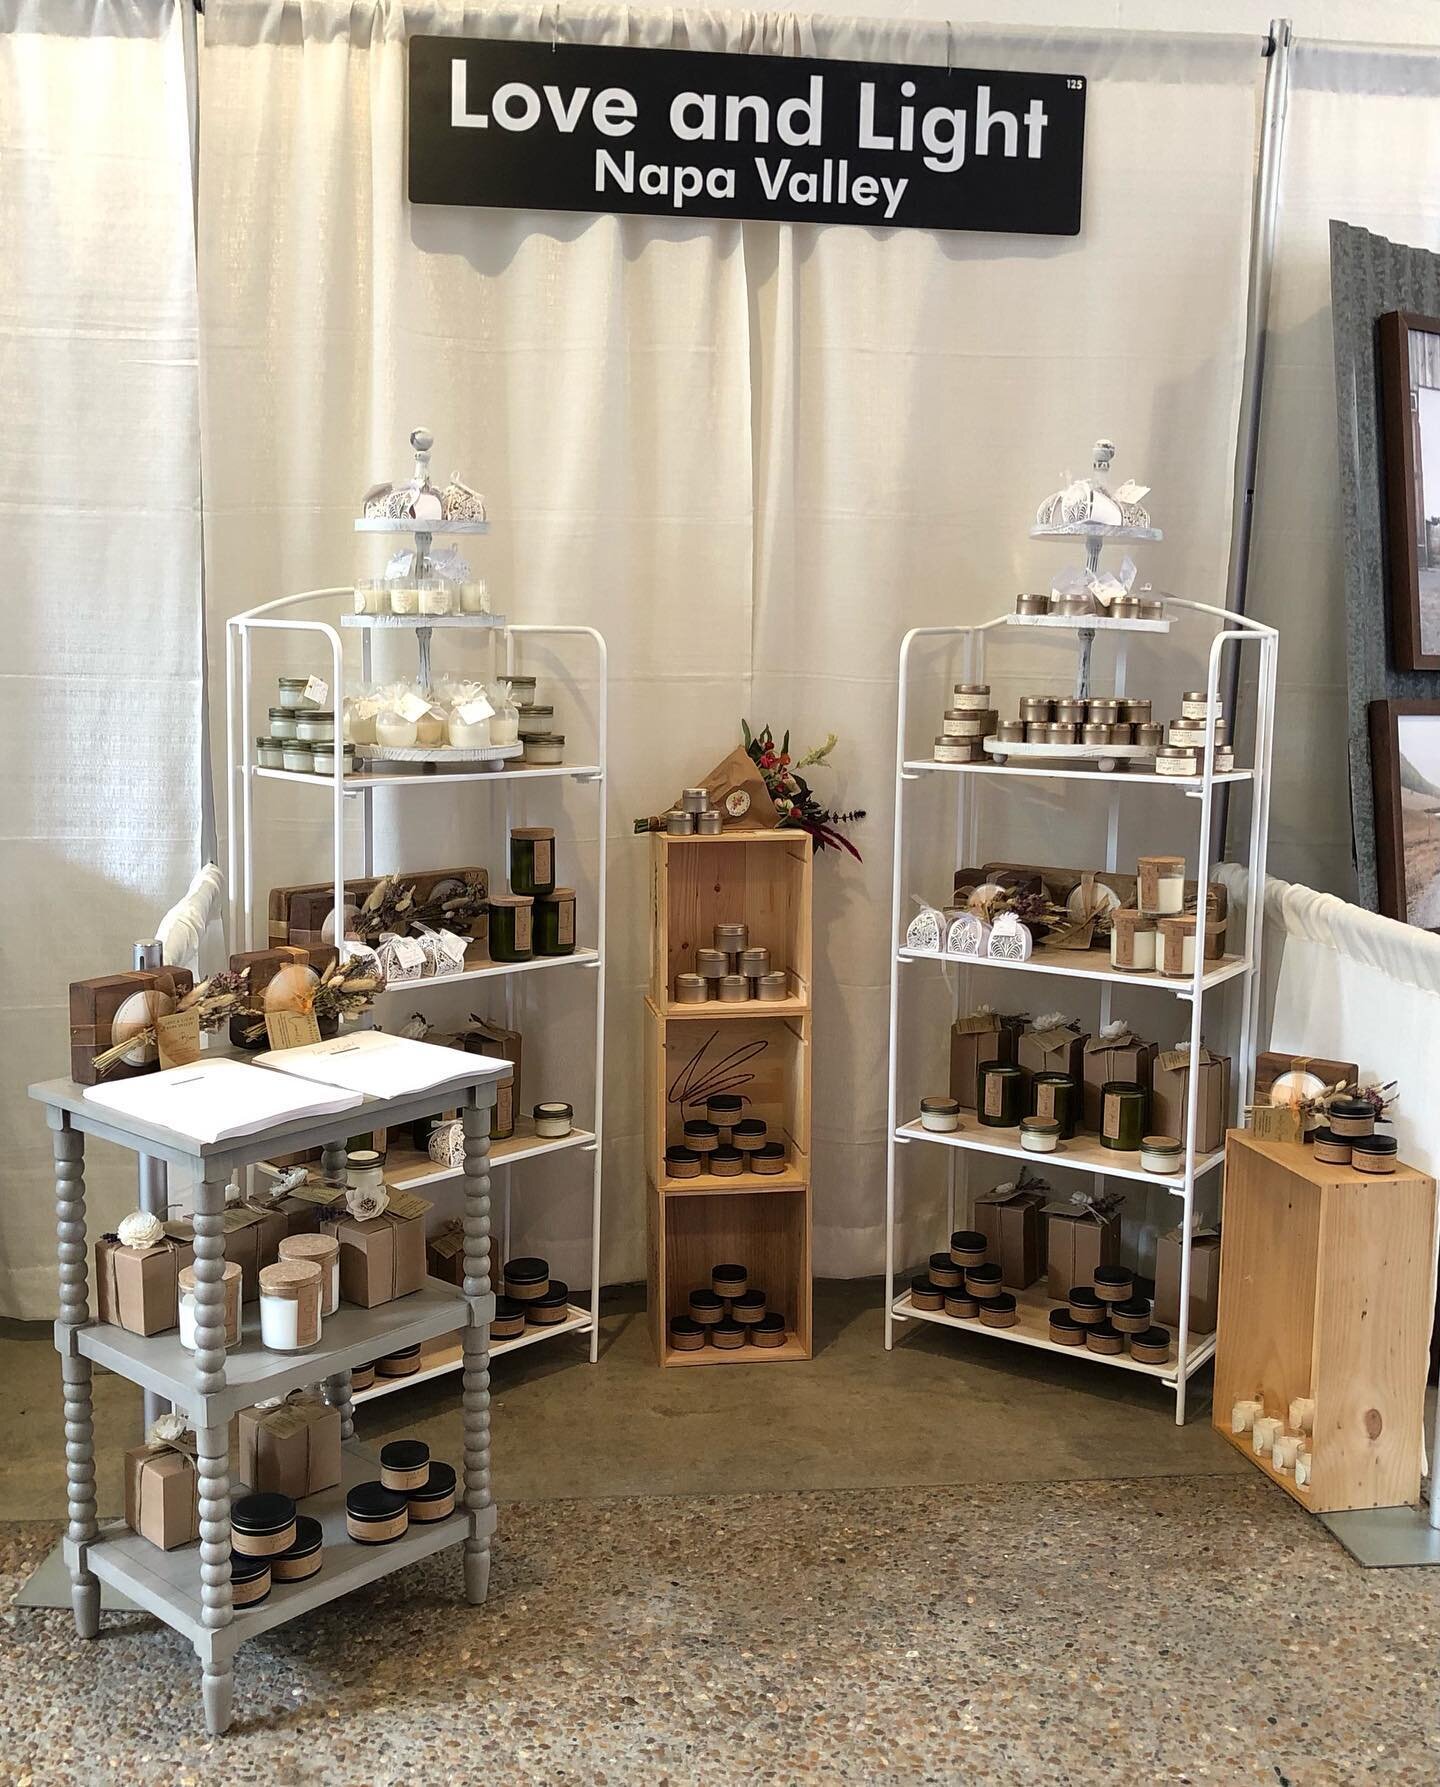 Love and Light Napa Valley is at the Wedding Expo in Santa Rosa! Next to our friends at Cow Track Ranch!! ❤️